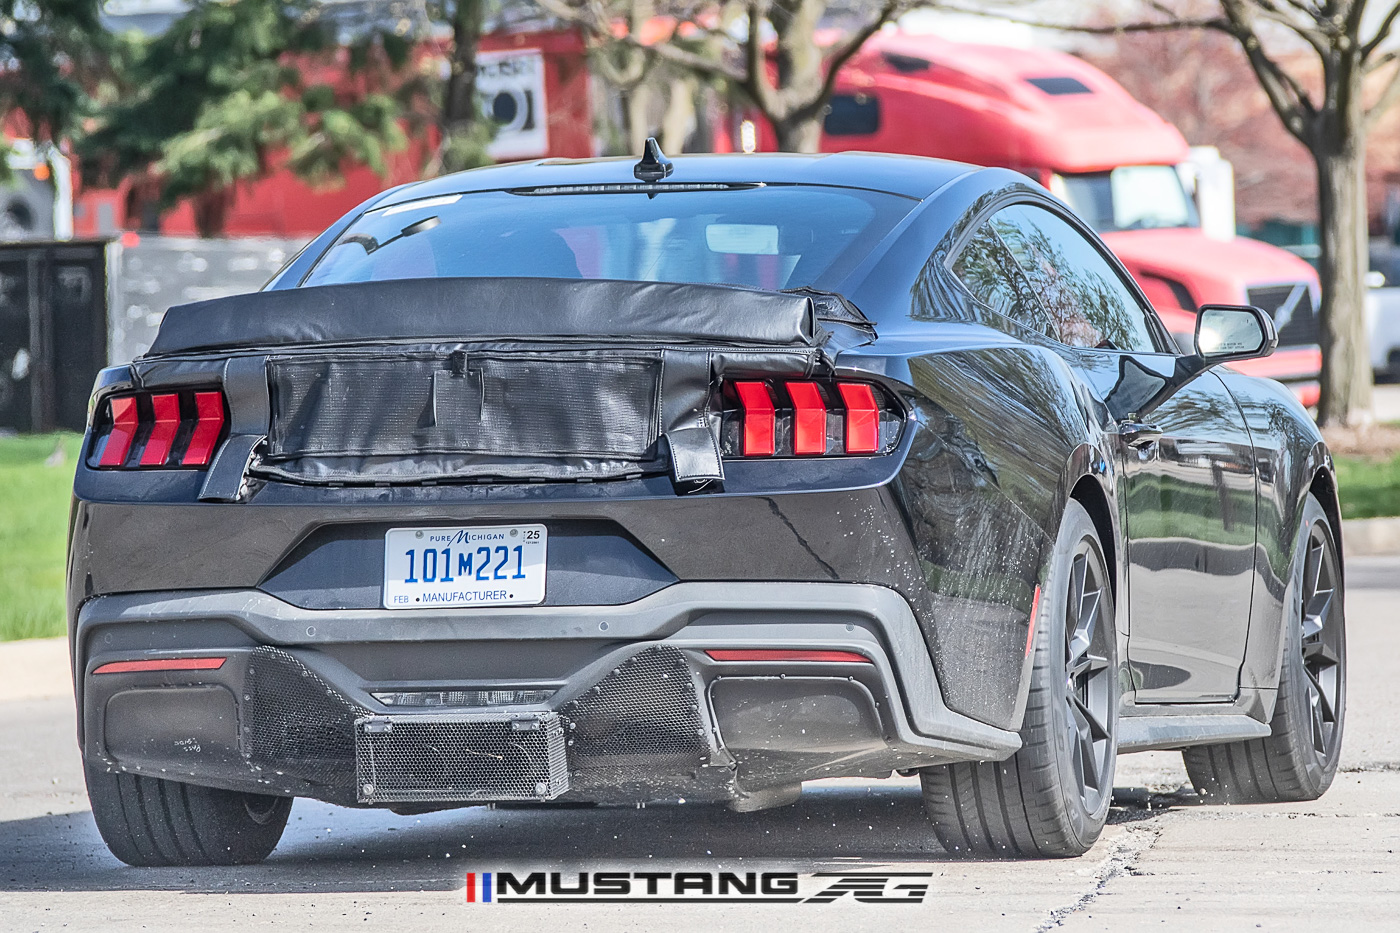 S650 Mustang 📸 Mustang GT3 Road-Version Prototype Spied Testing with Center-Exit Exhaust s650-mustang-variant-prototype-center-exit-exhaust-14